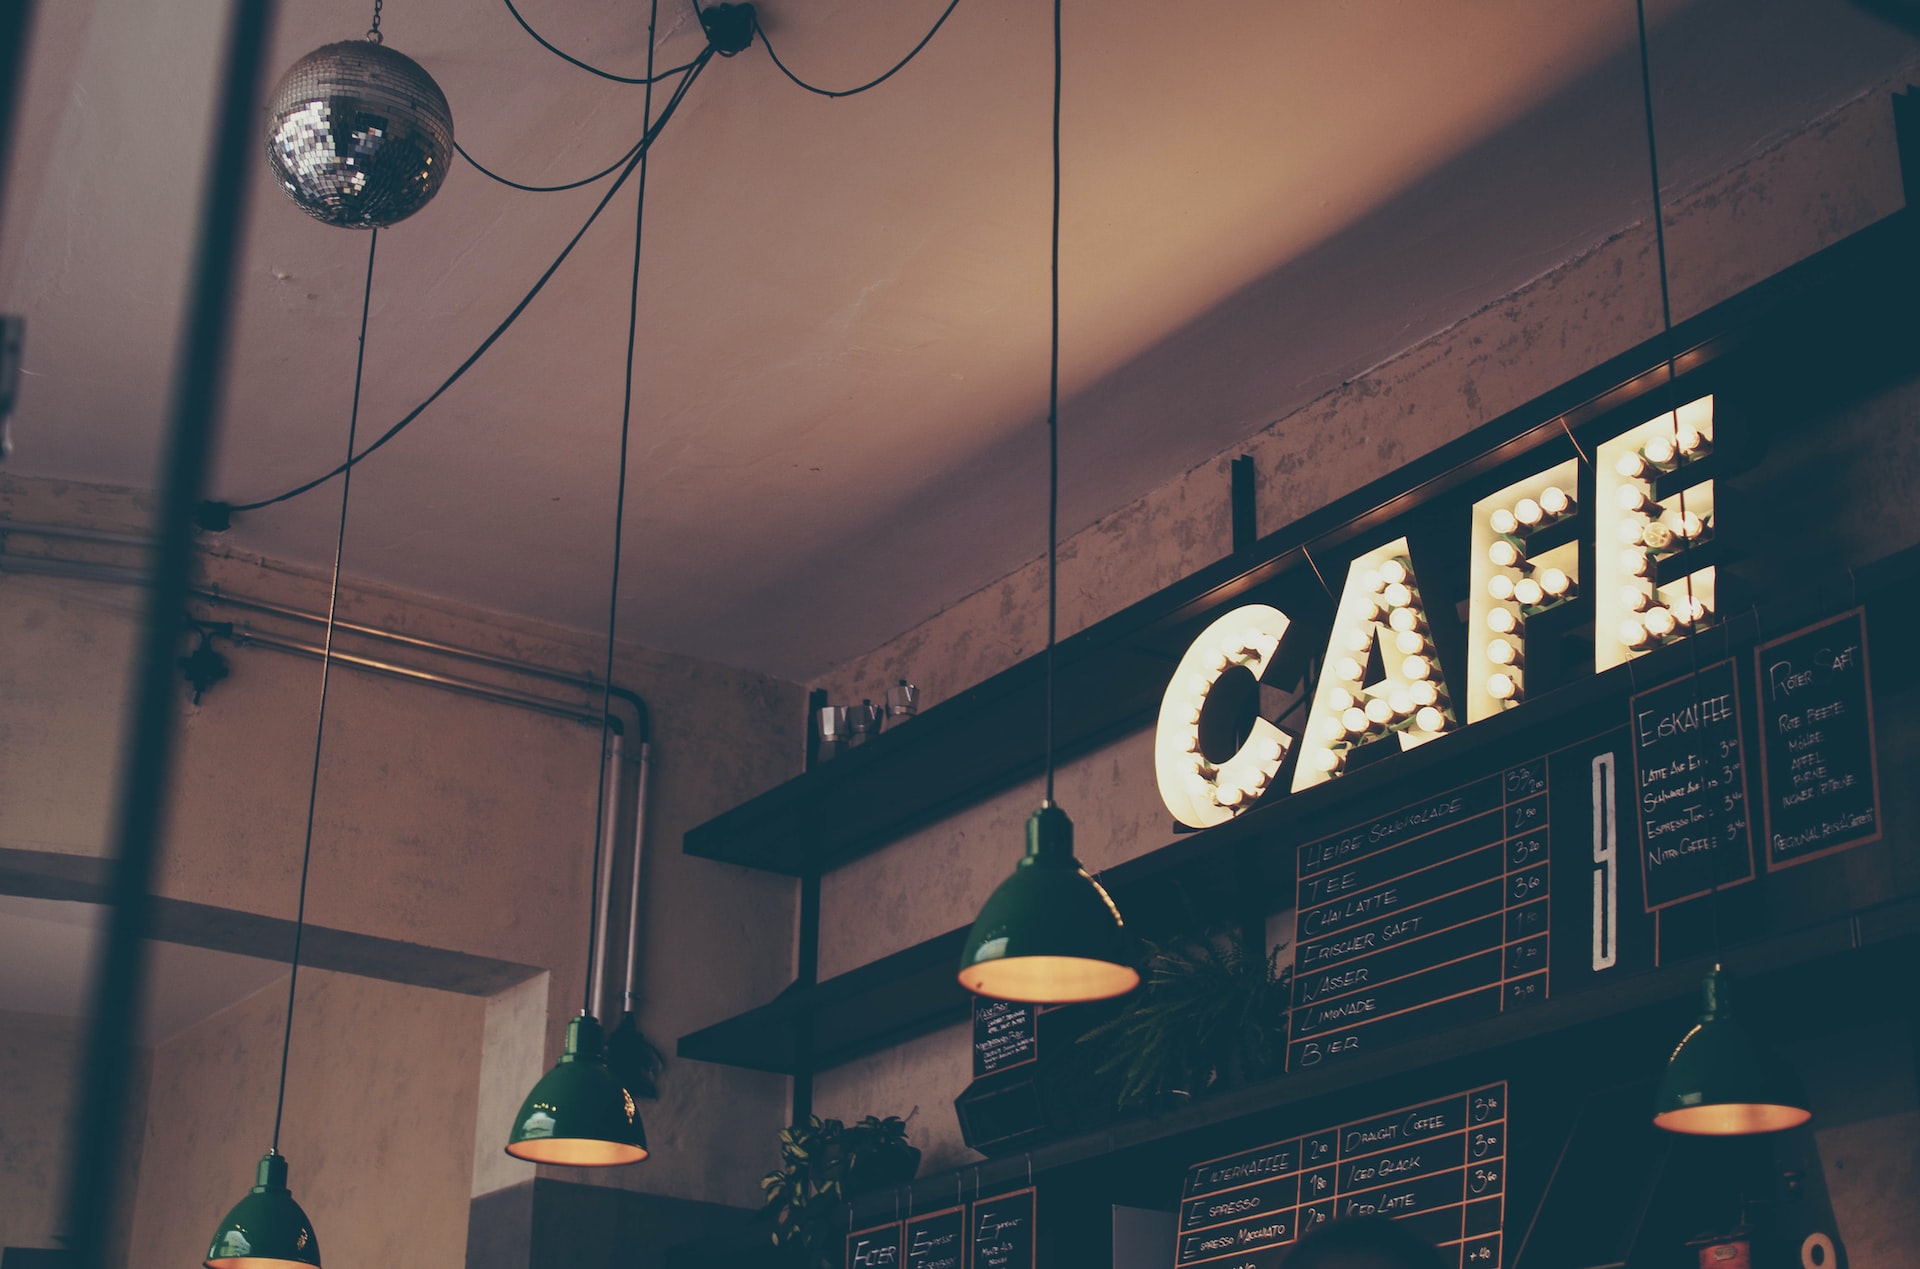 What Is Included In a Cafe Business Plan?